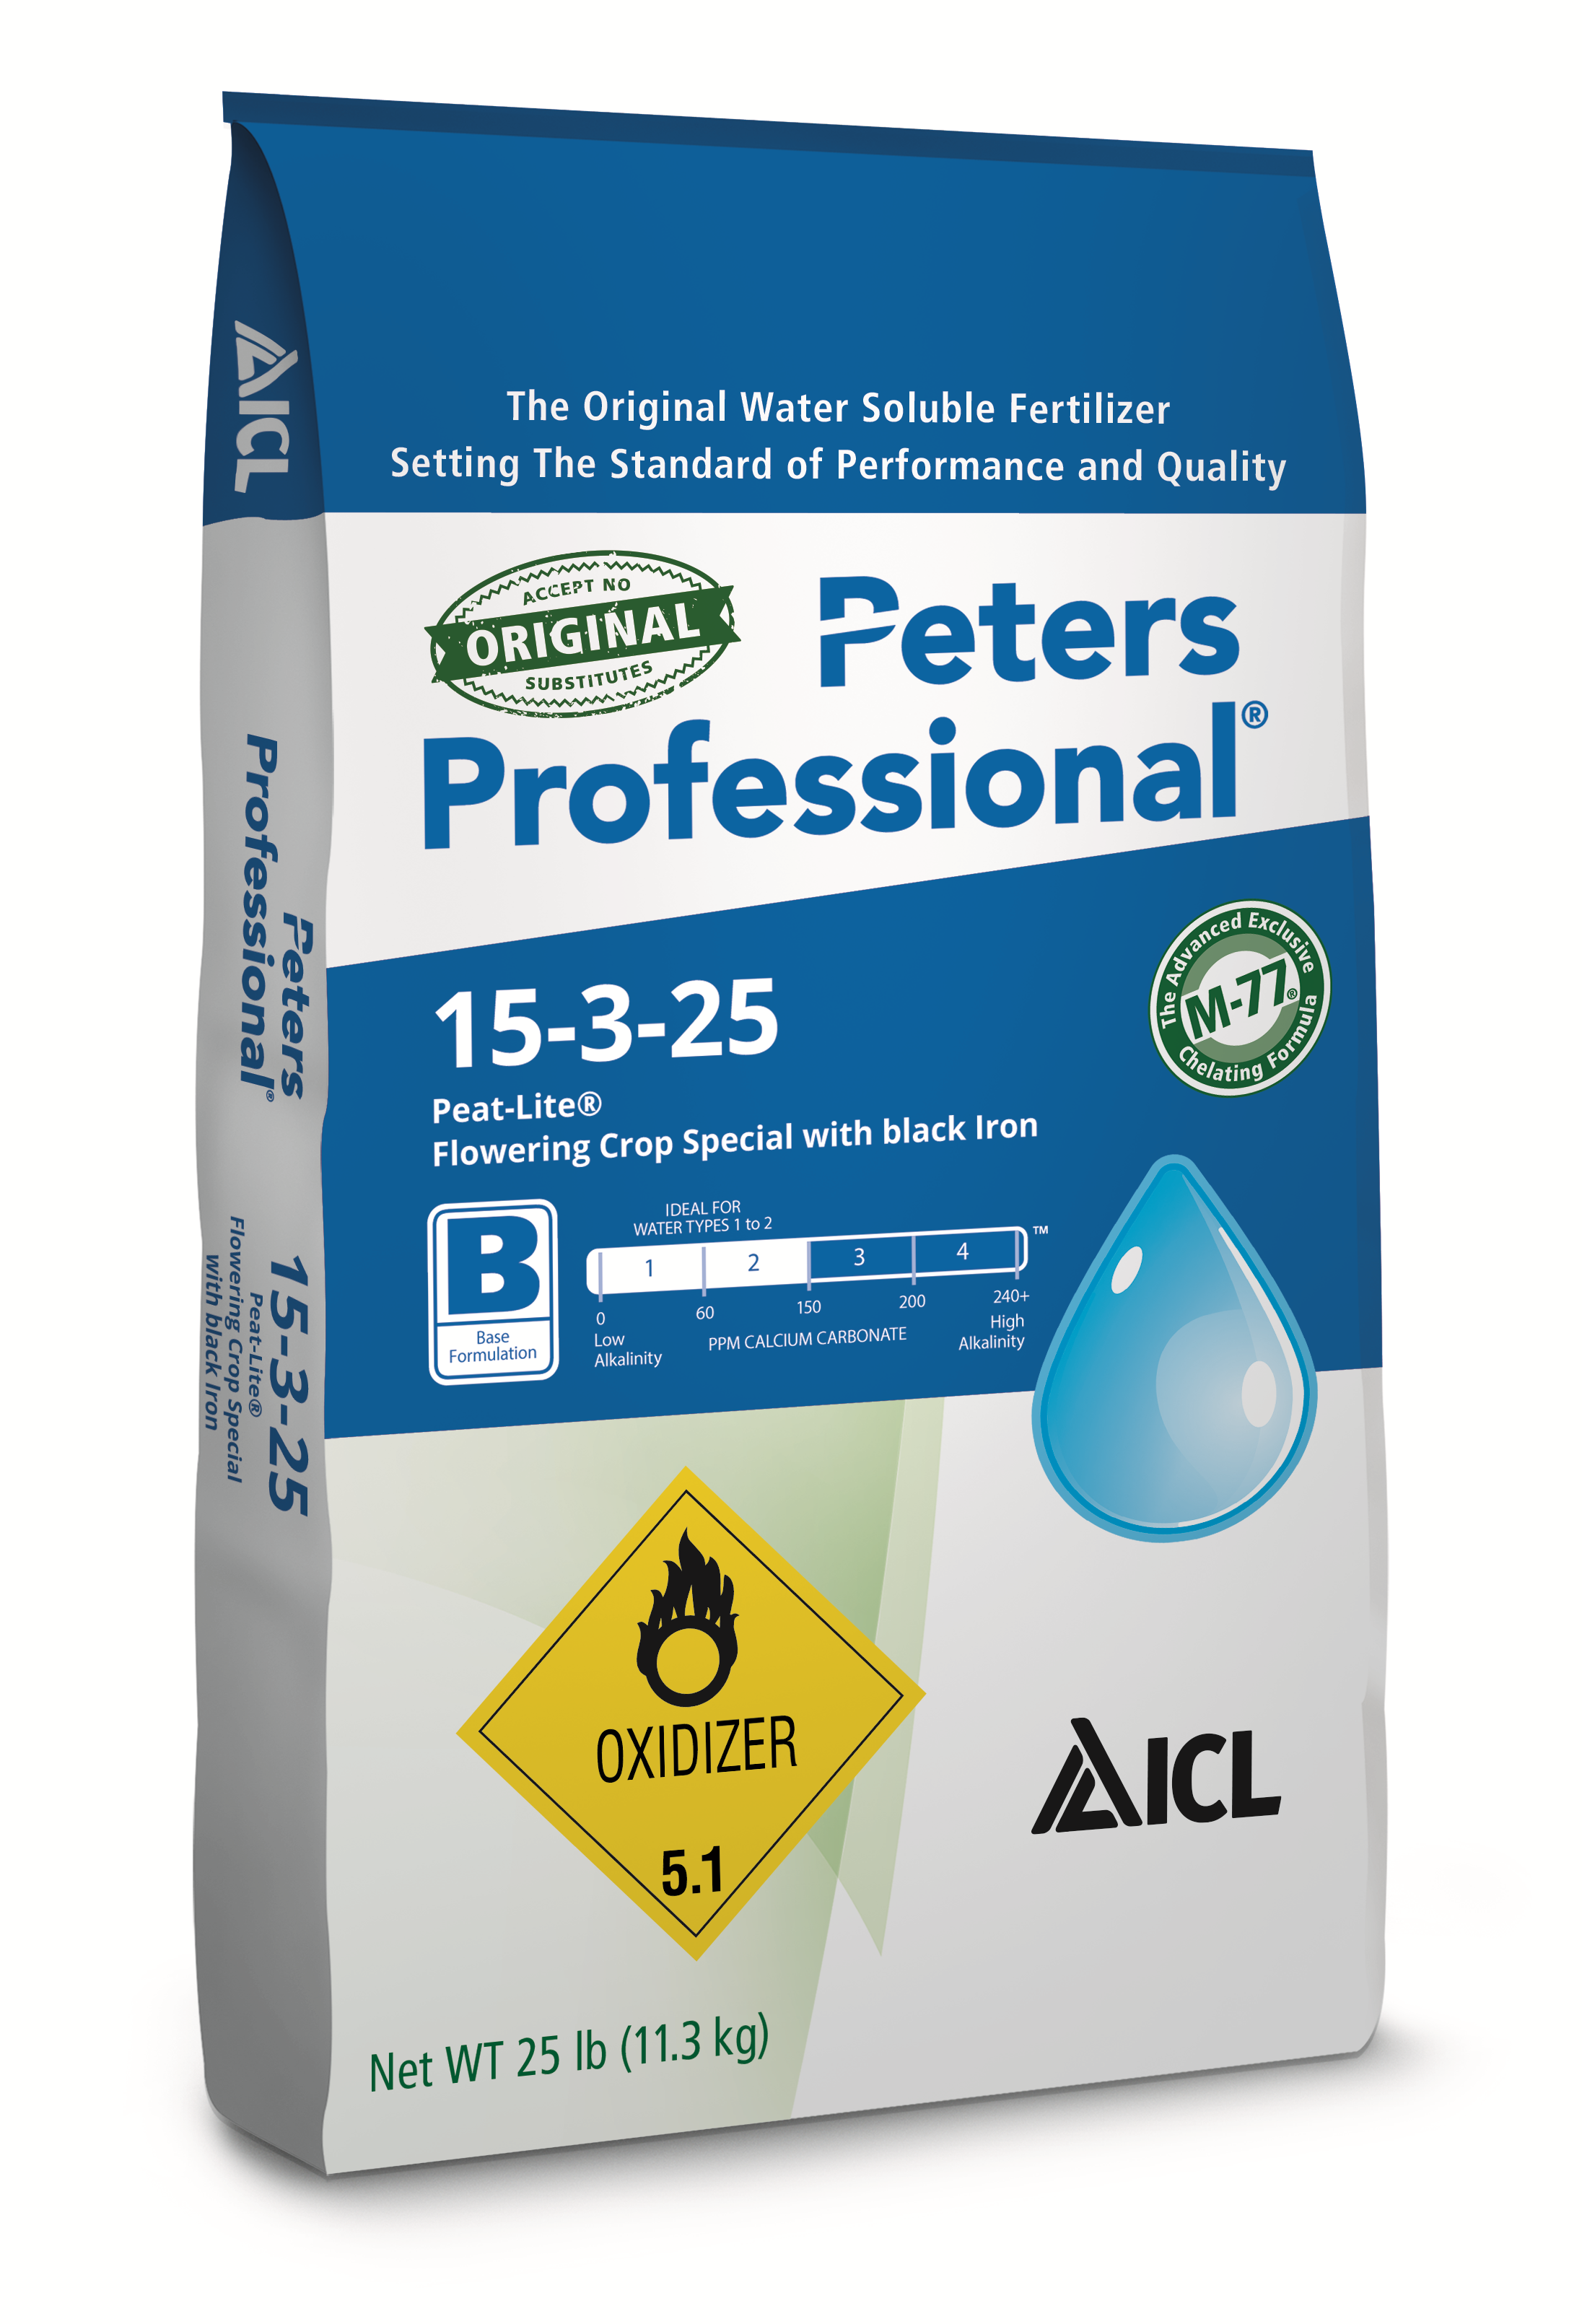 Peters Professional 15-3-25 with Black Iron 25 lb bag - Water Soluble Fertilizer